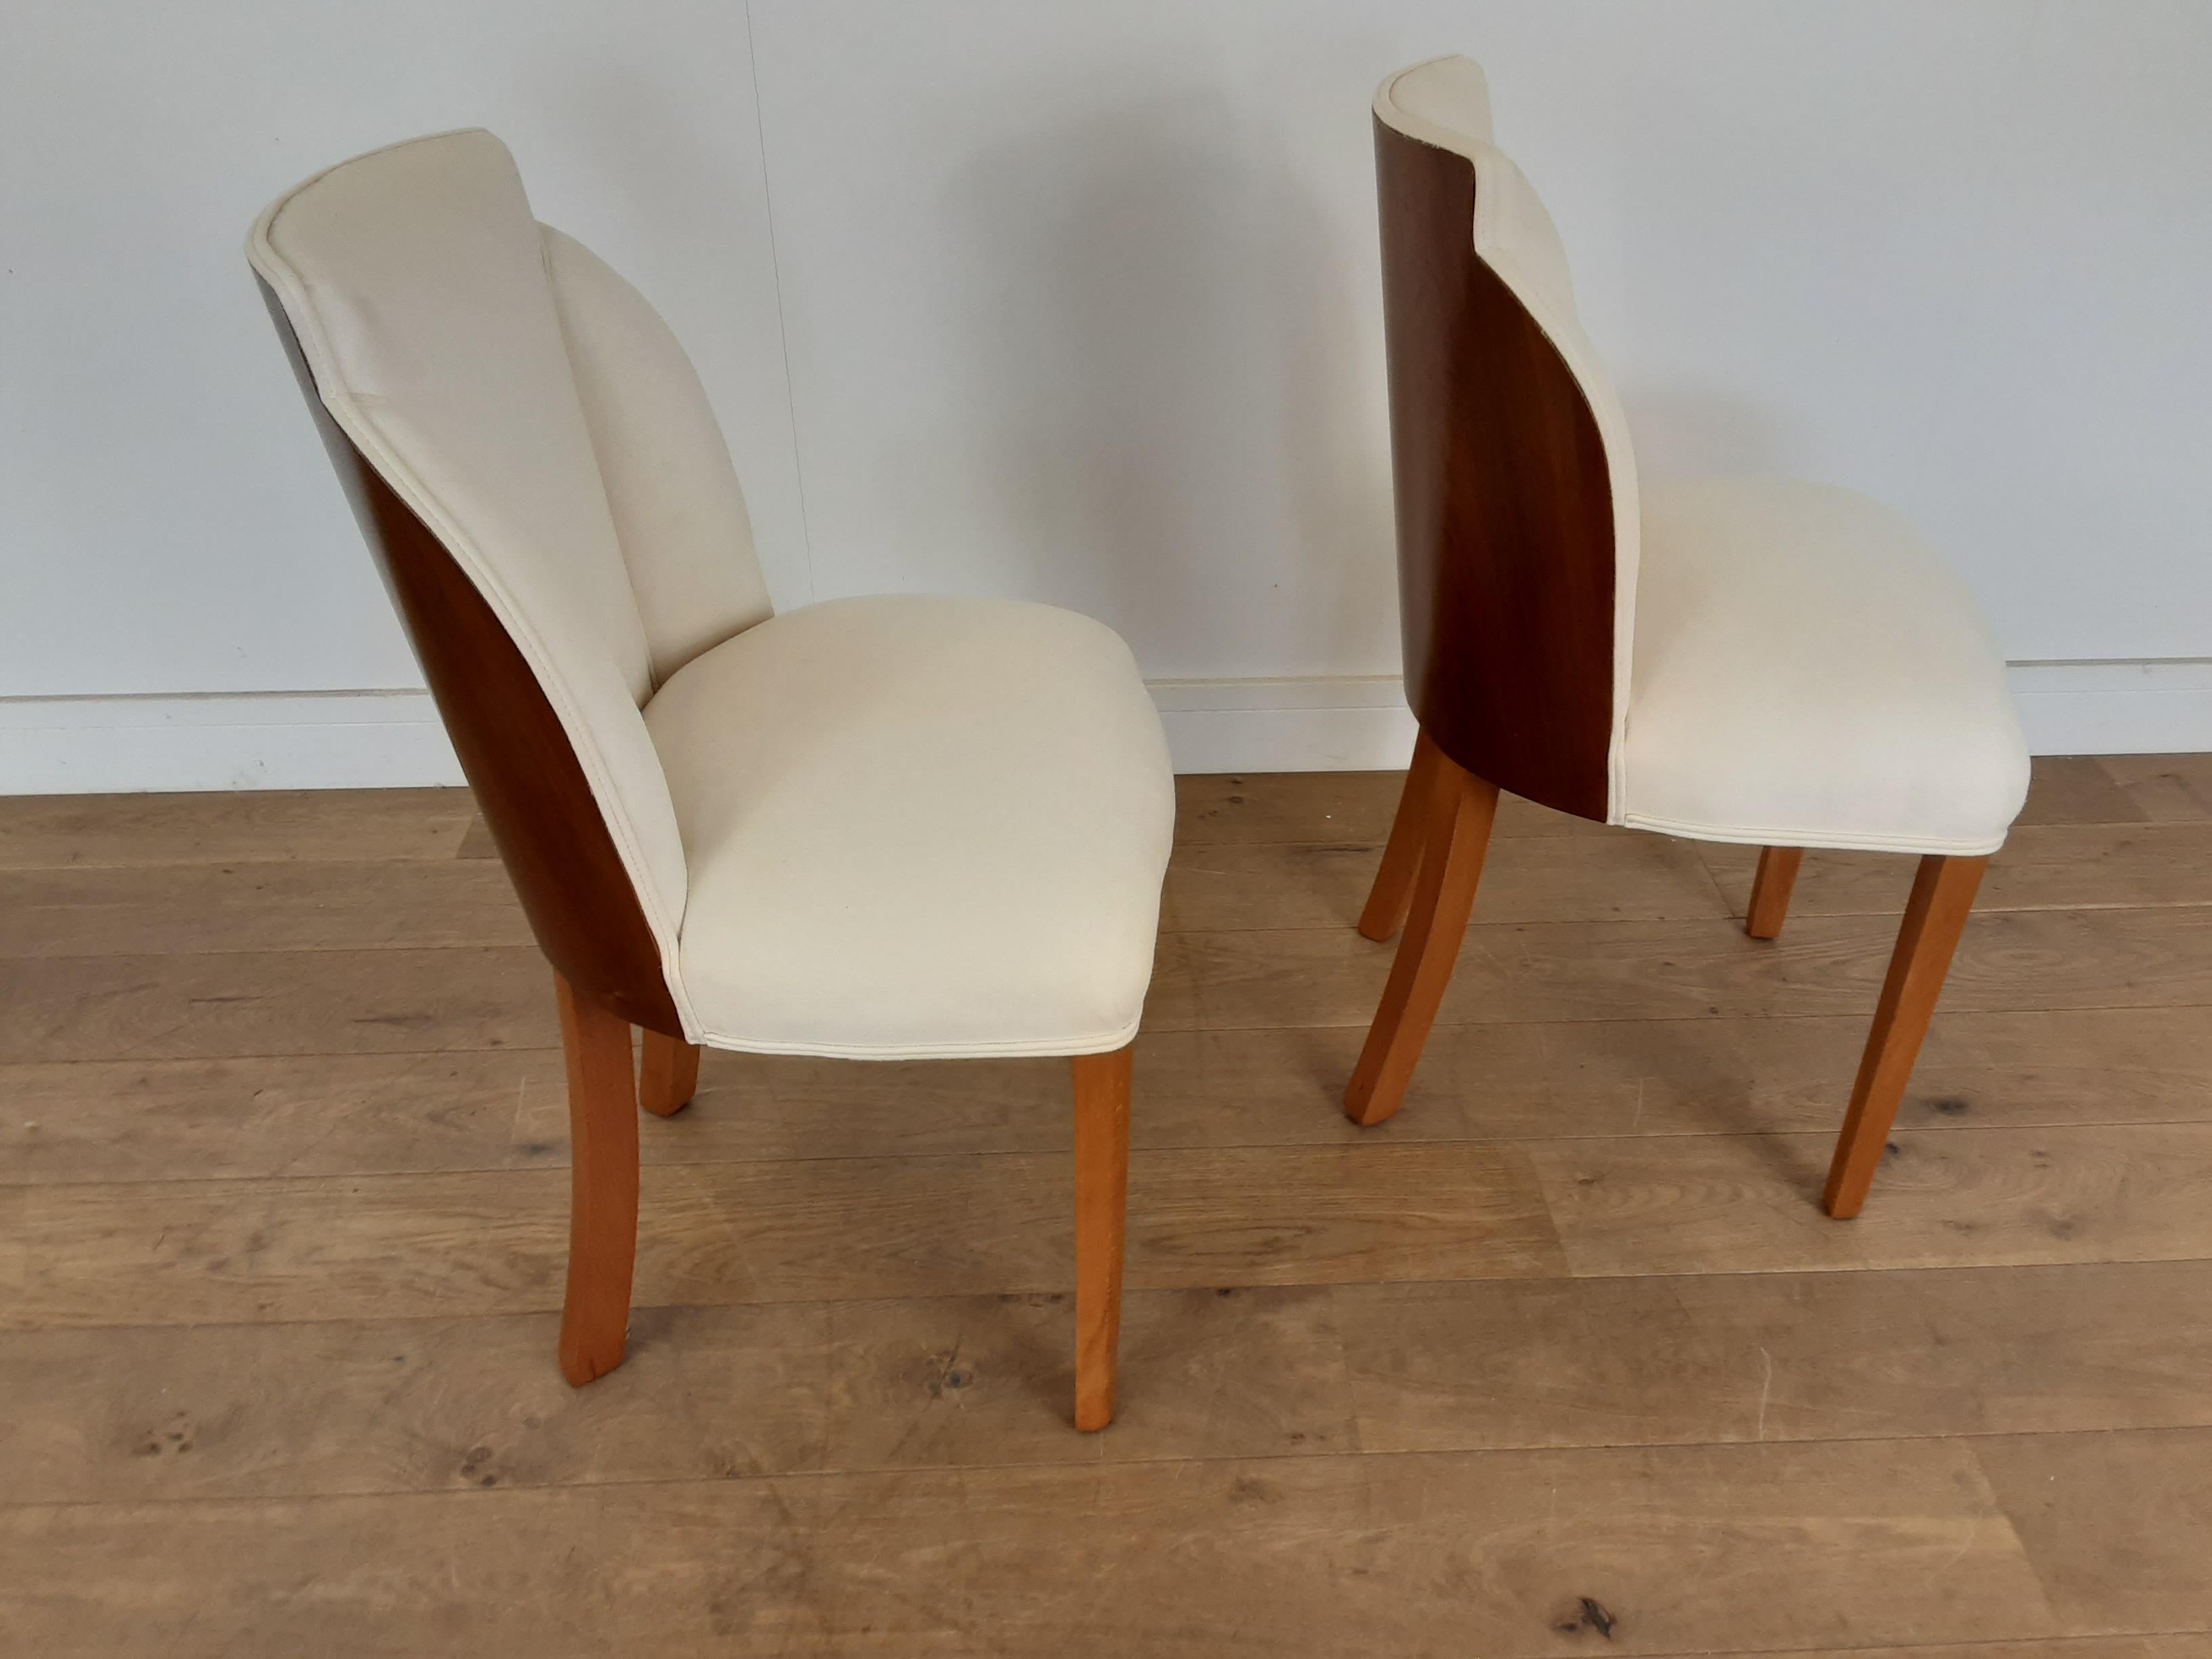 Pair of Art Deco Cloud Back Chairs in Walnut by Epstein, circa 1930 In Good Condition For Sale In London, GB